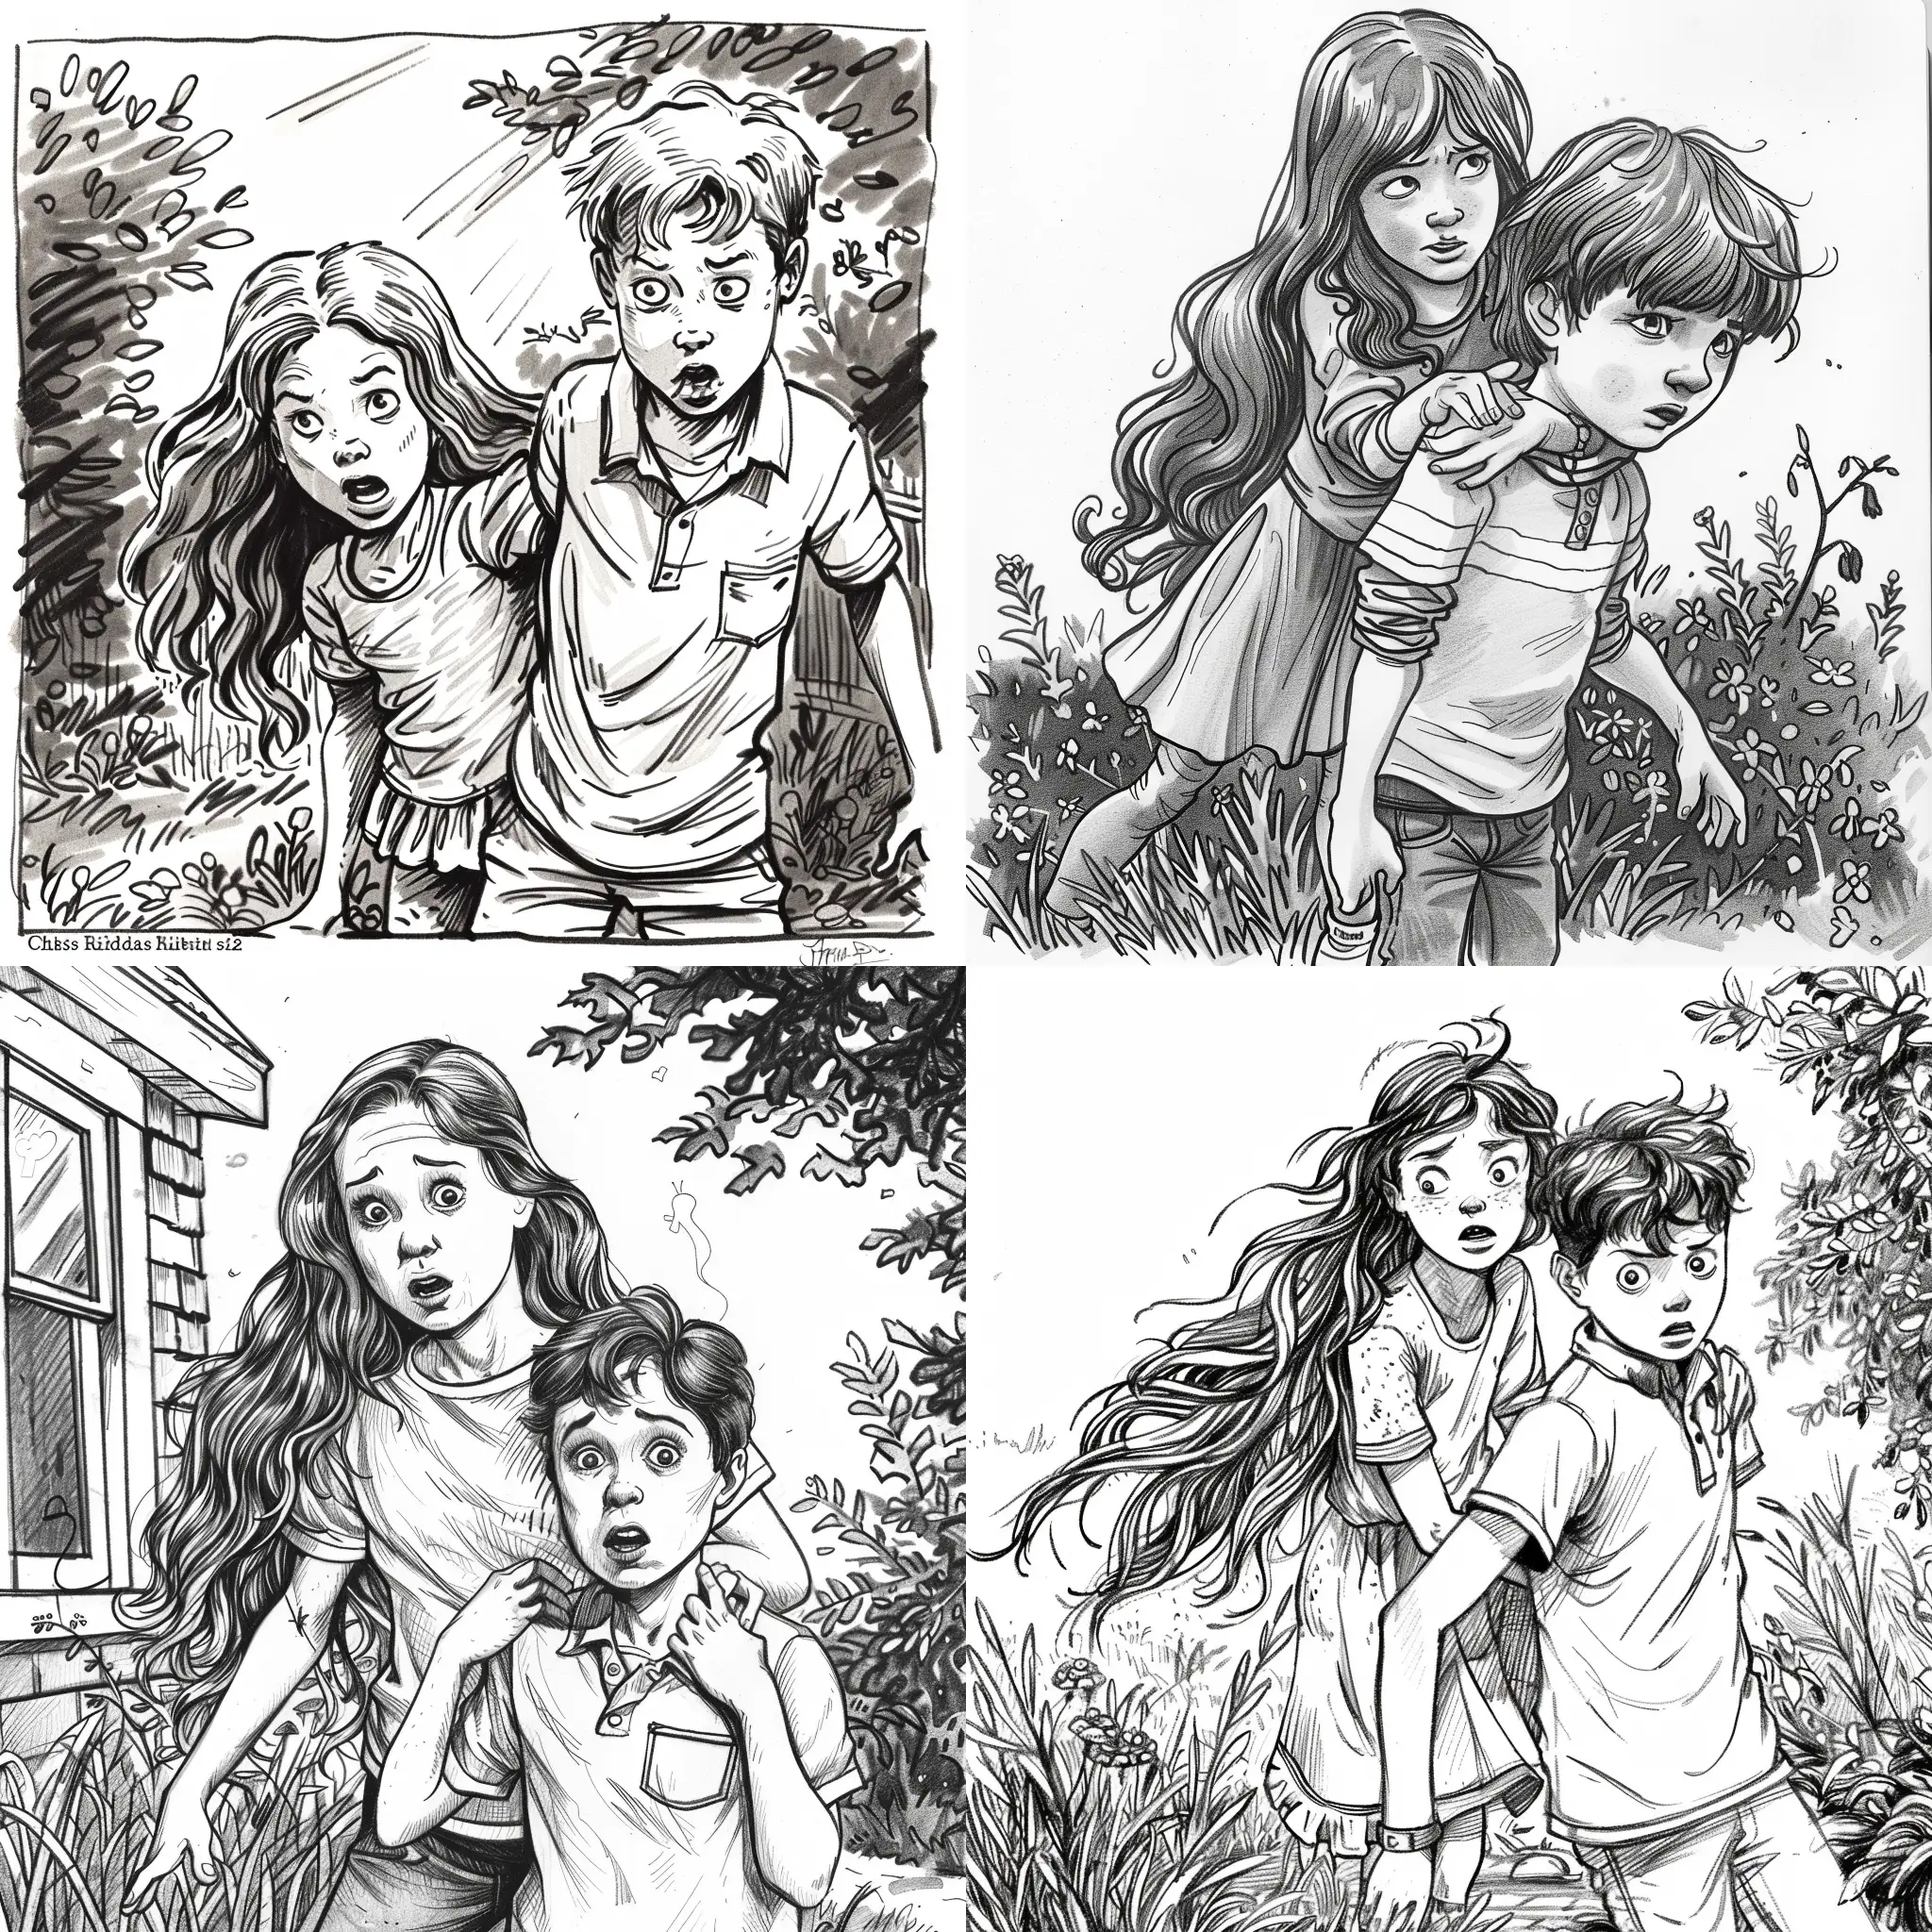 Siblings-Playfully-Startle-Each-Other-in-Charming-Garden-Scene